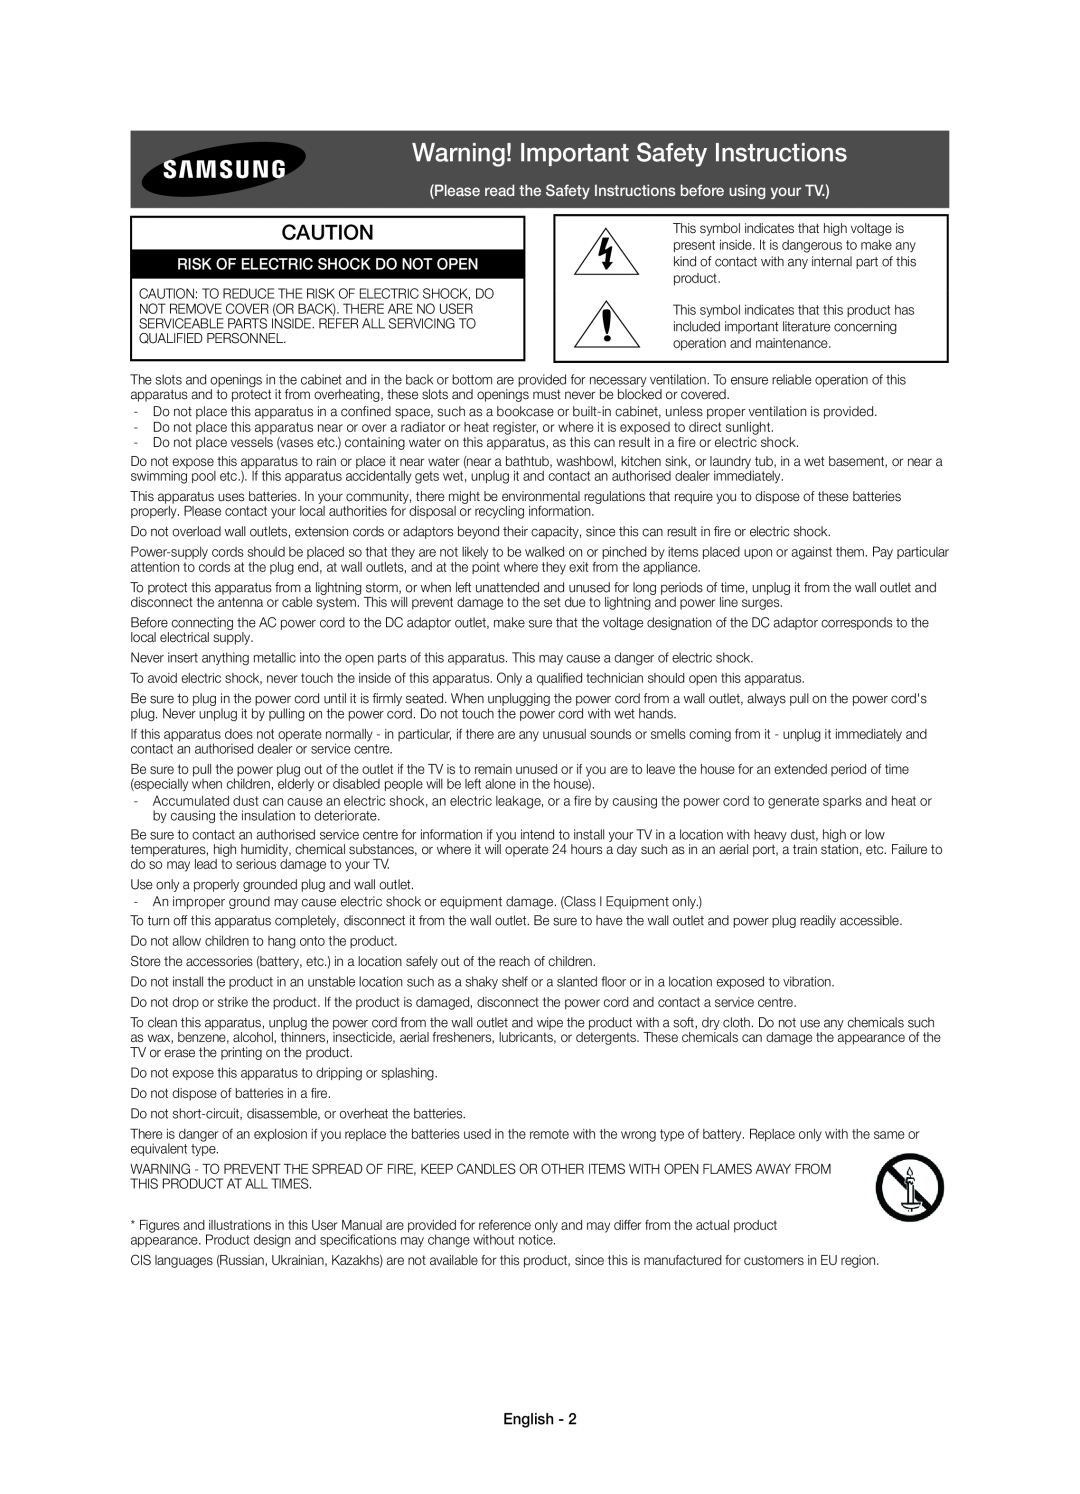 Samsung UE48JU6400KXXC Warning! Important Safety Instructions, Please read the Safety Instructions before using your TV 